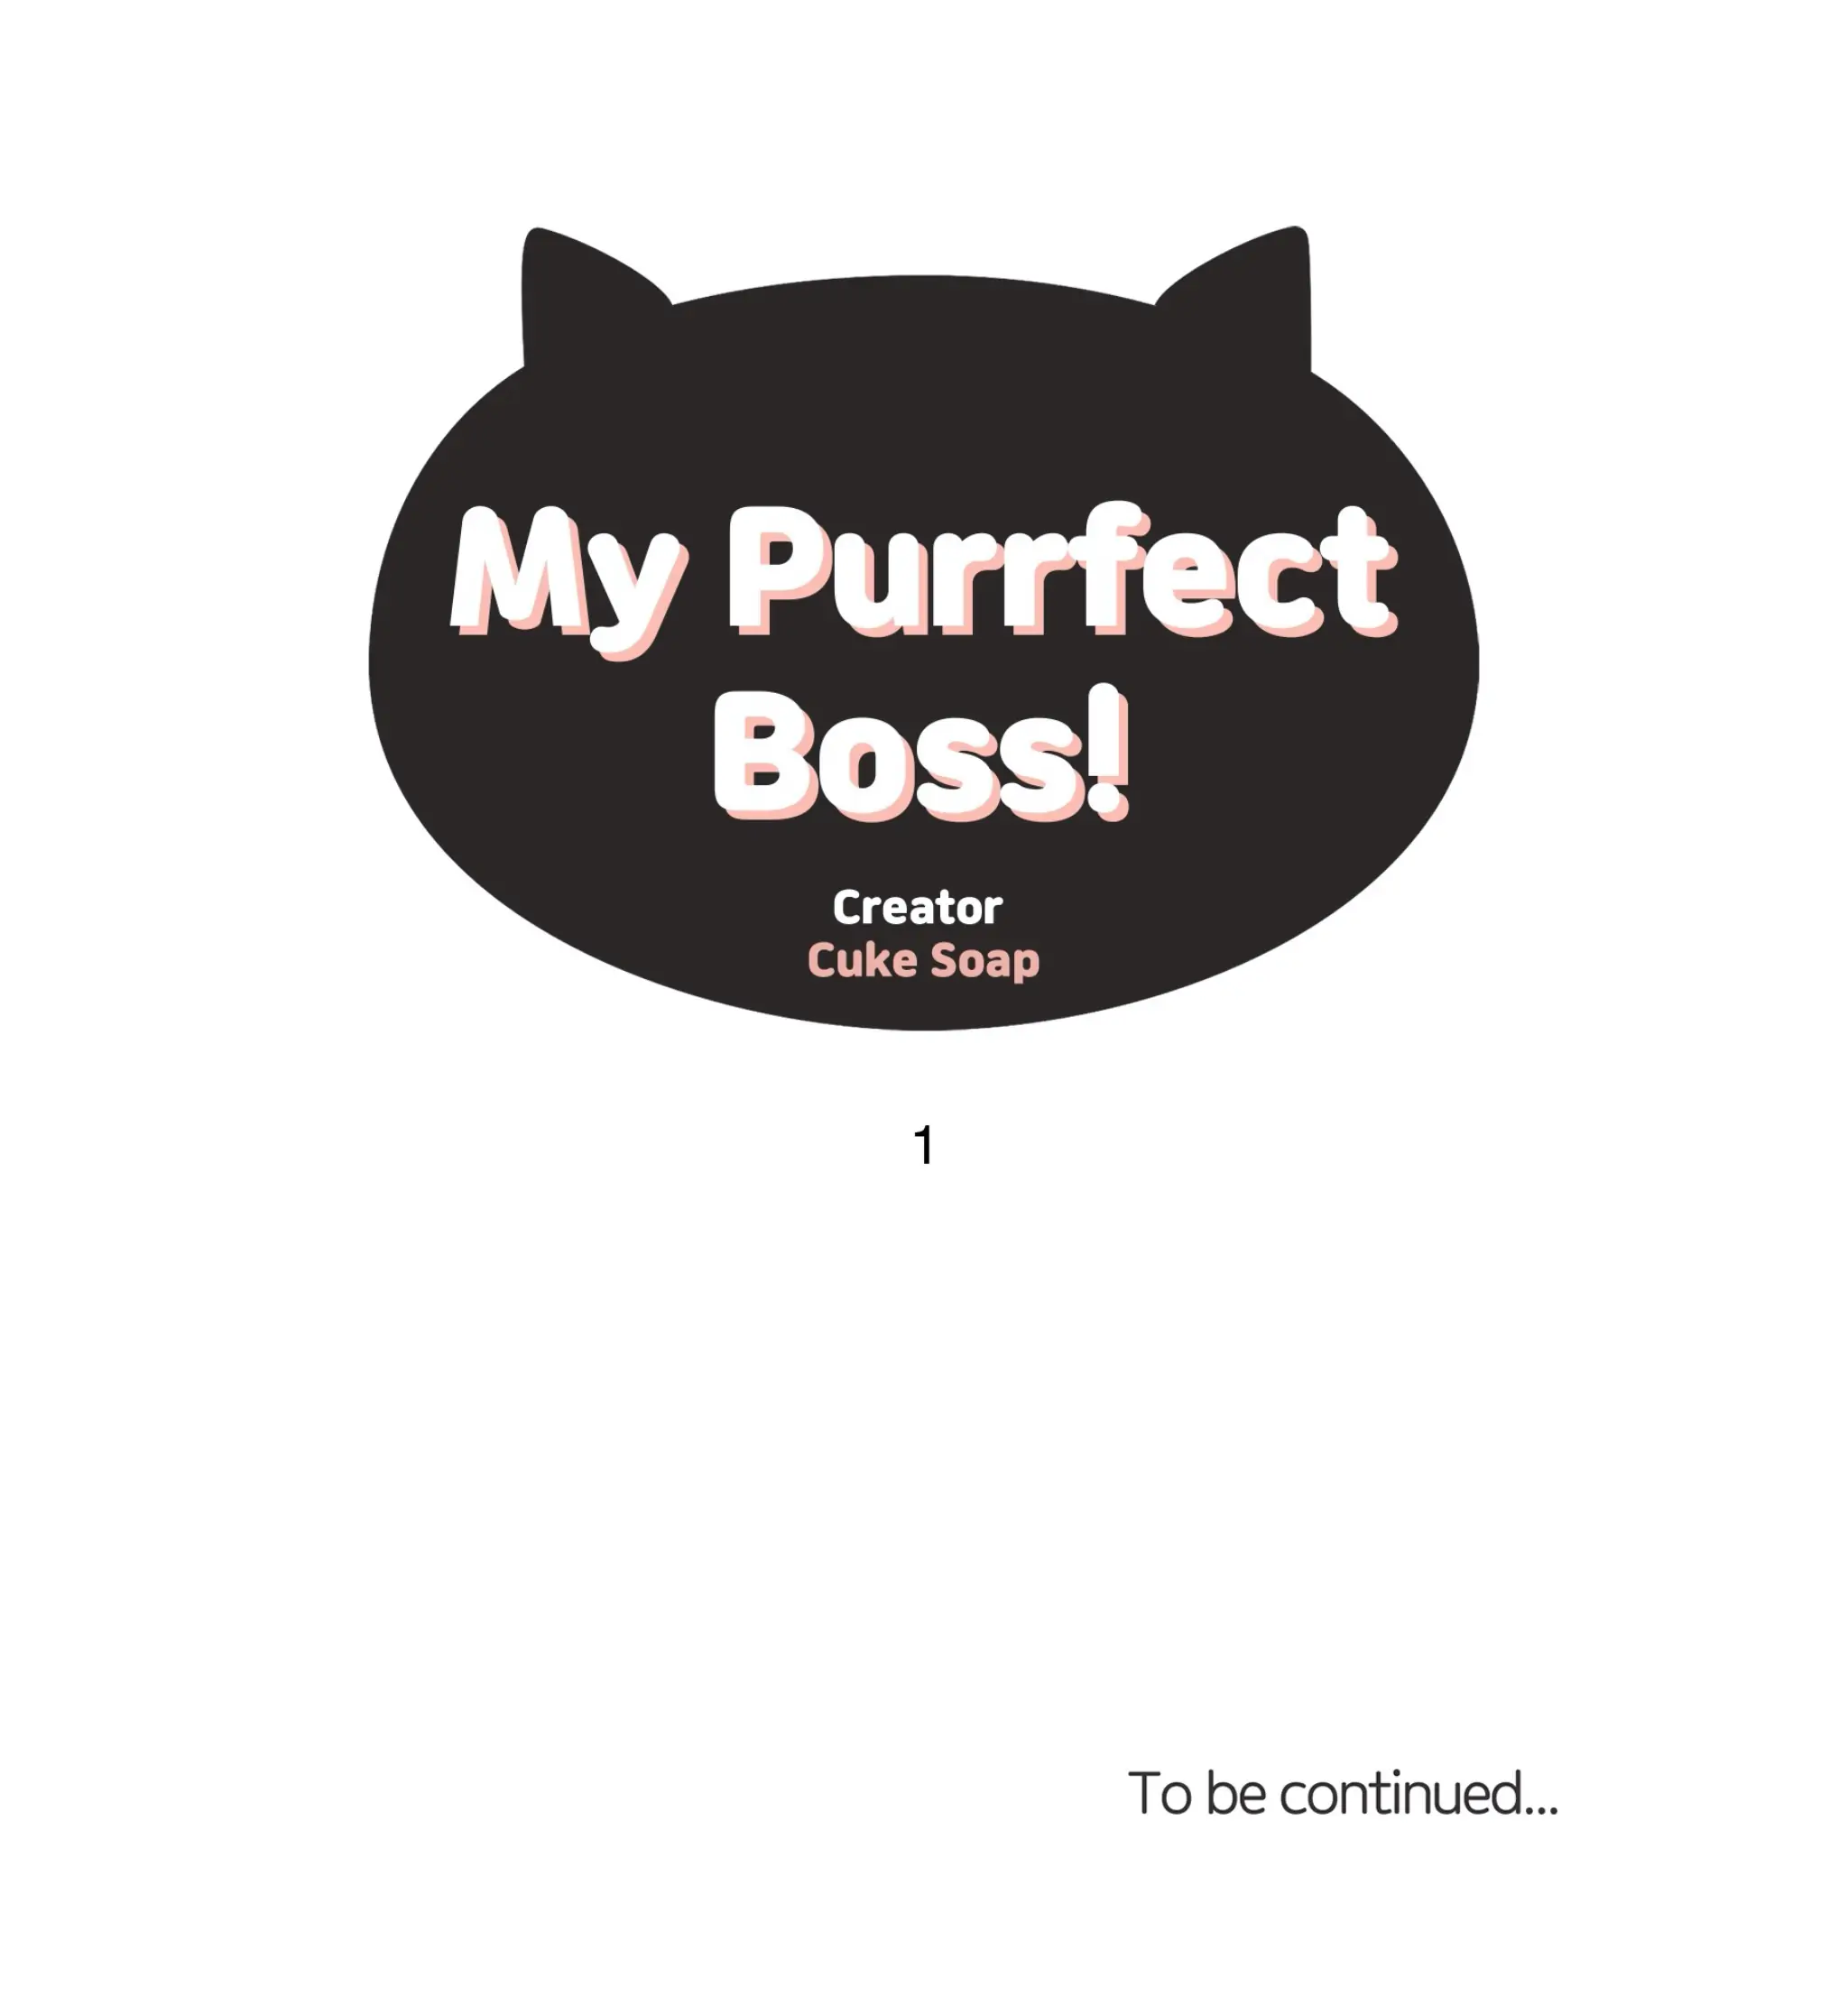 My Amazing Puurrfecto Boss! - 1 page 52-971501ca